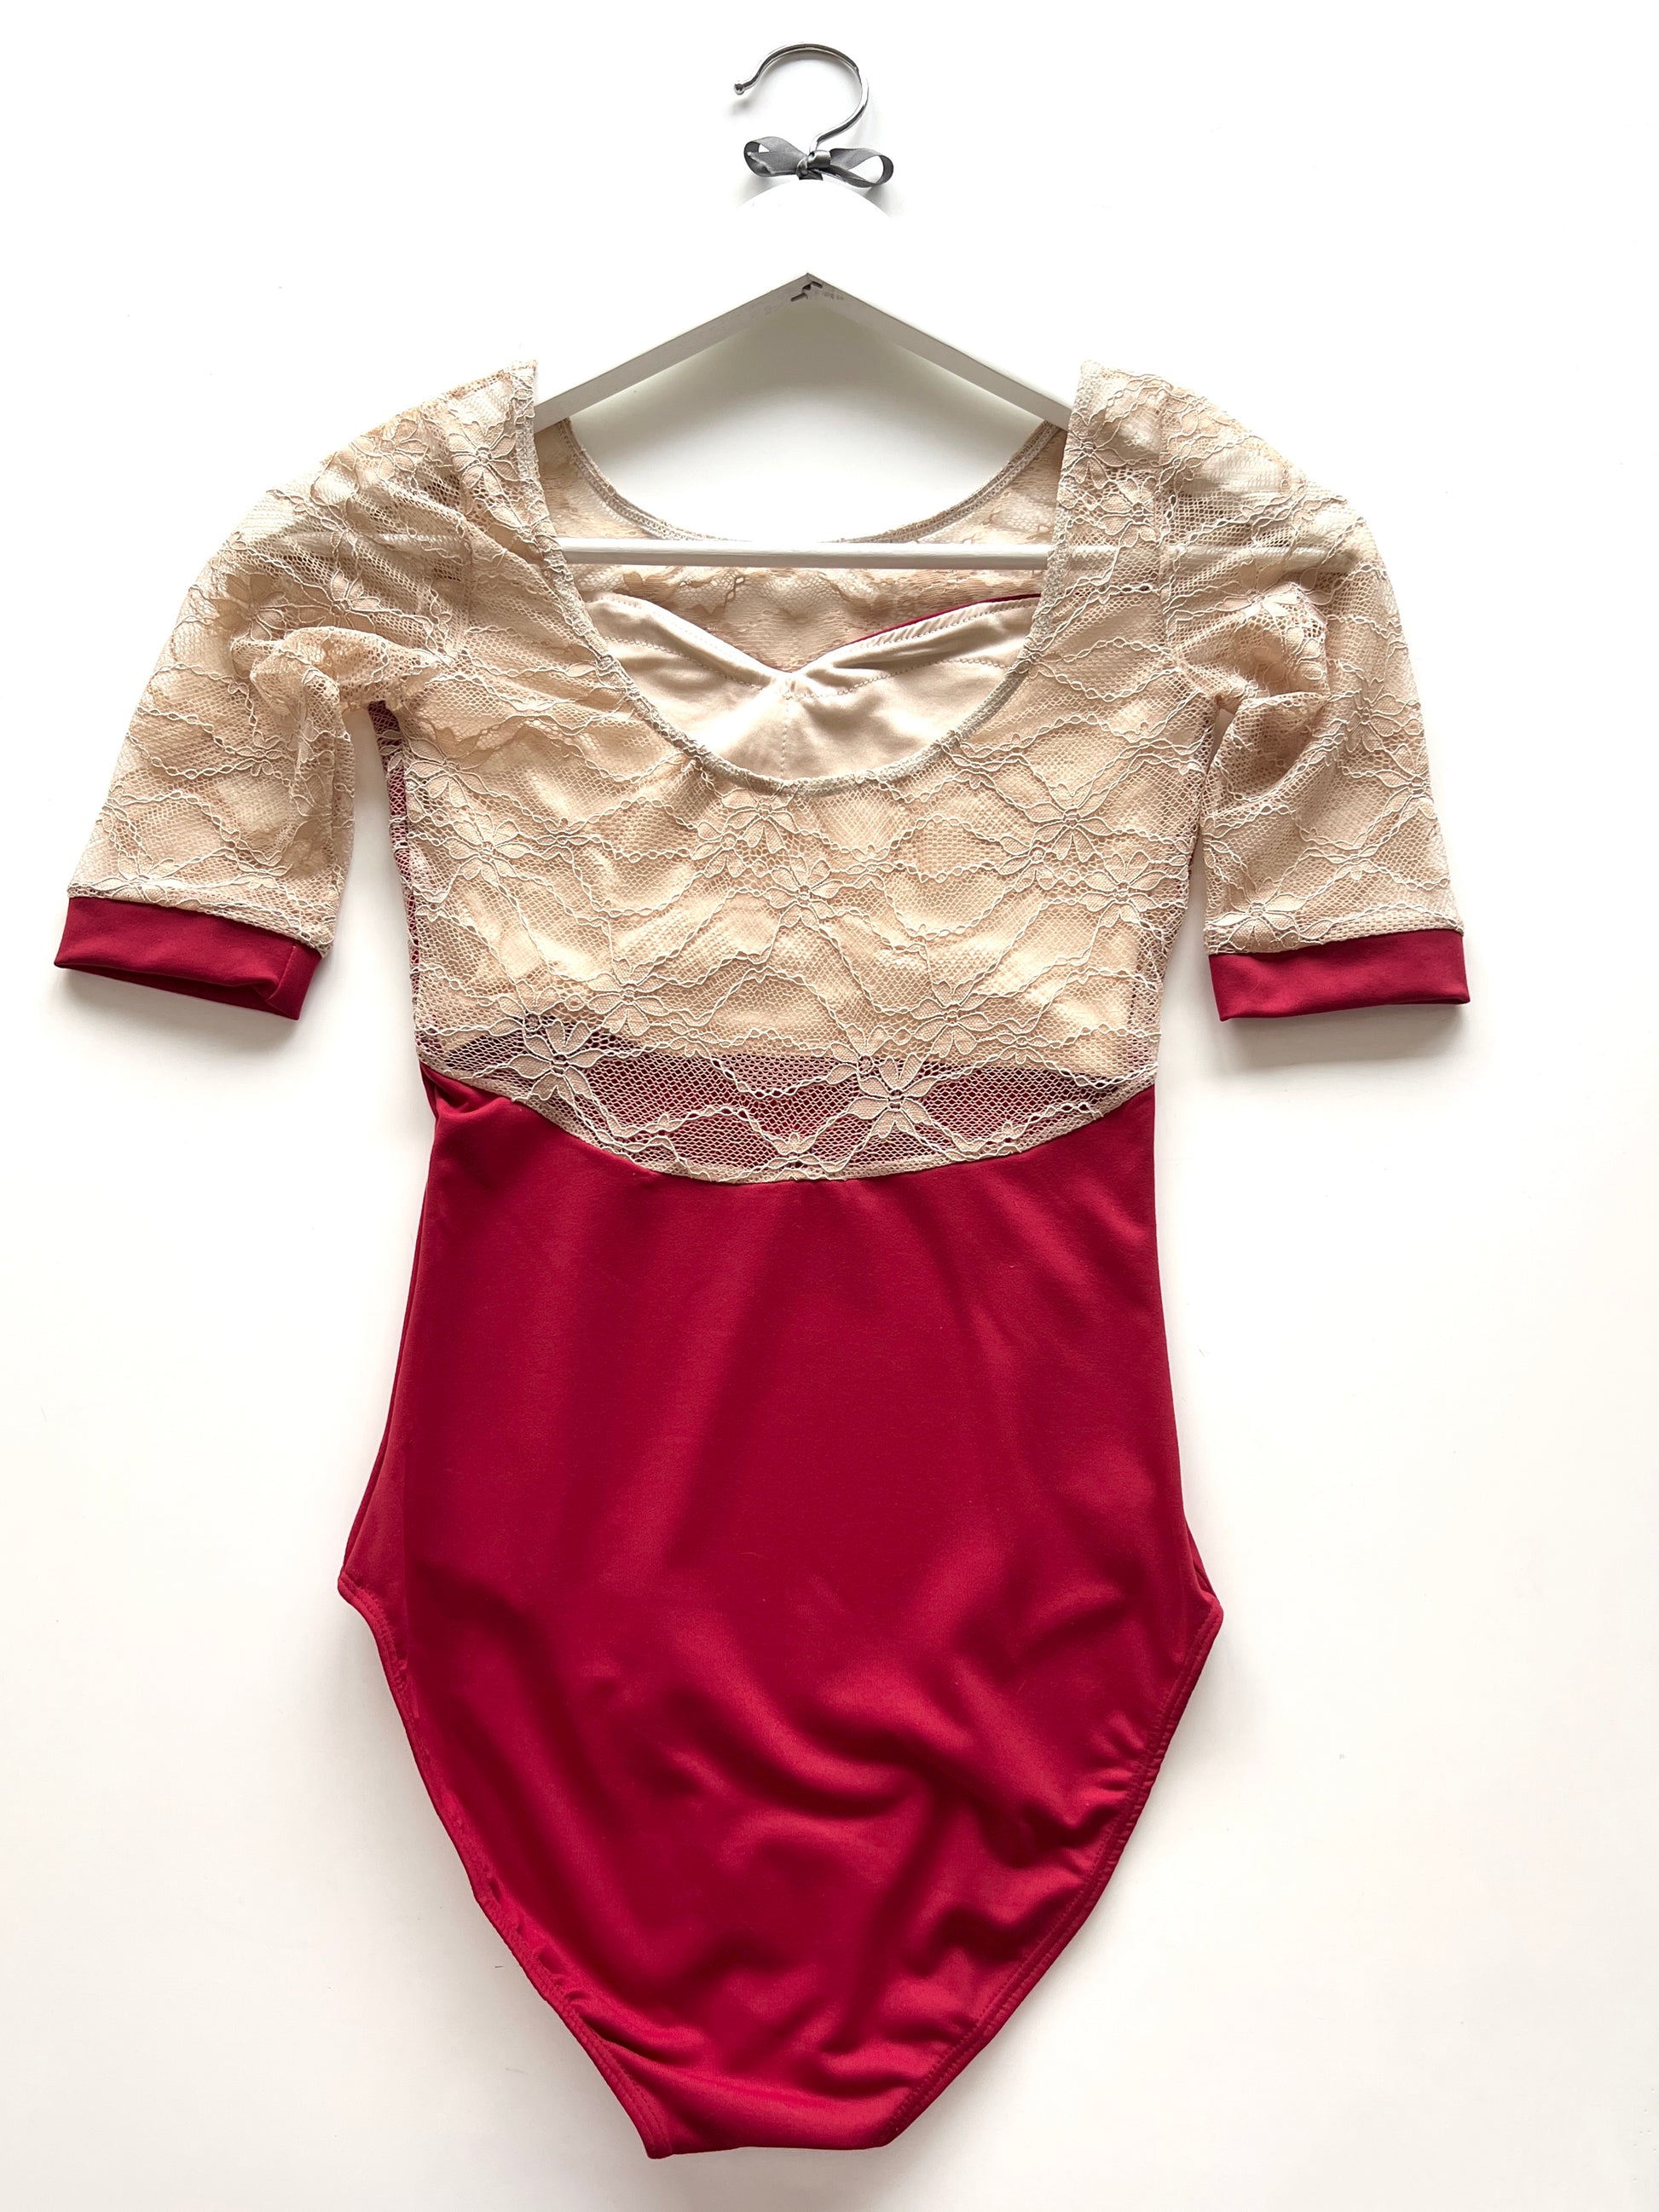 Lace sleeve leotard in red from The Collective Dancewear